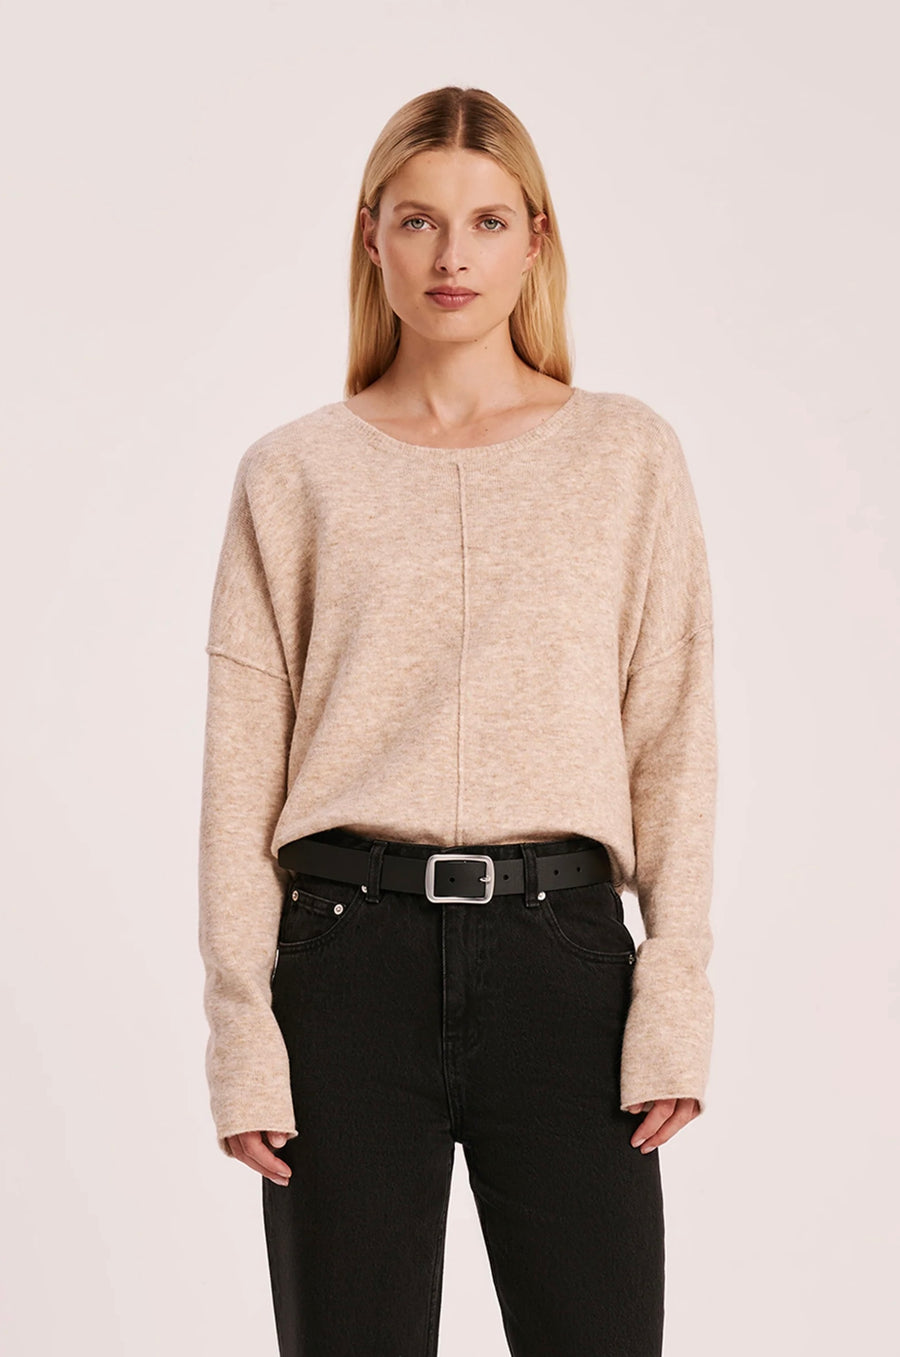 Nude Lucy II REMY Knit - Oatmeal